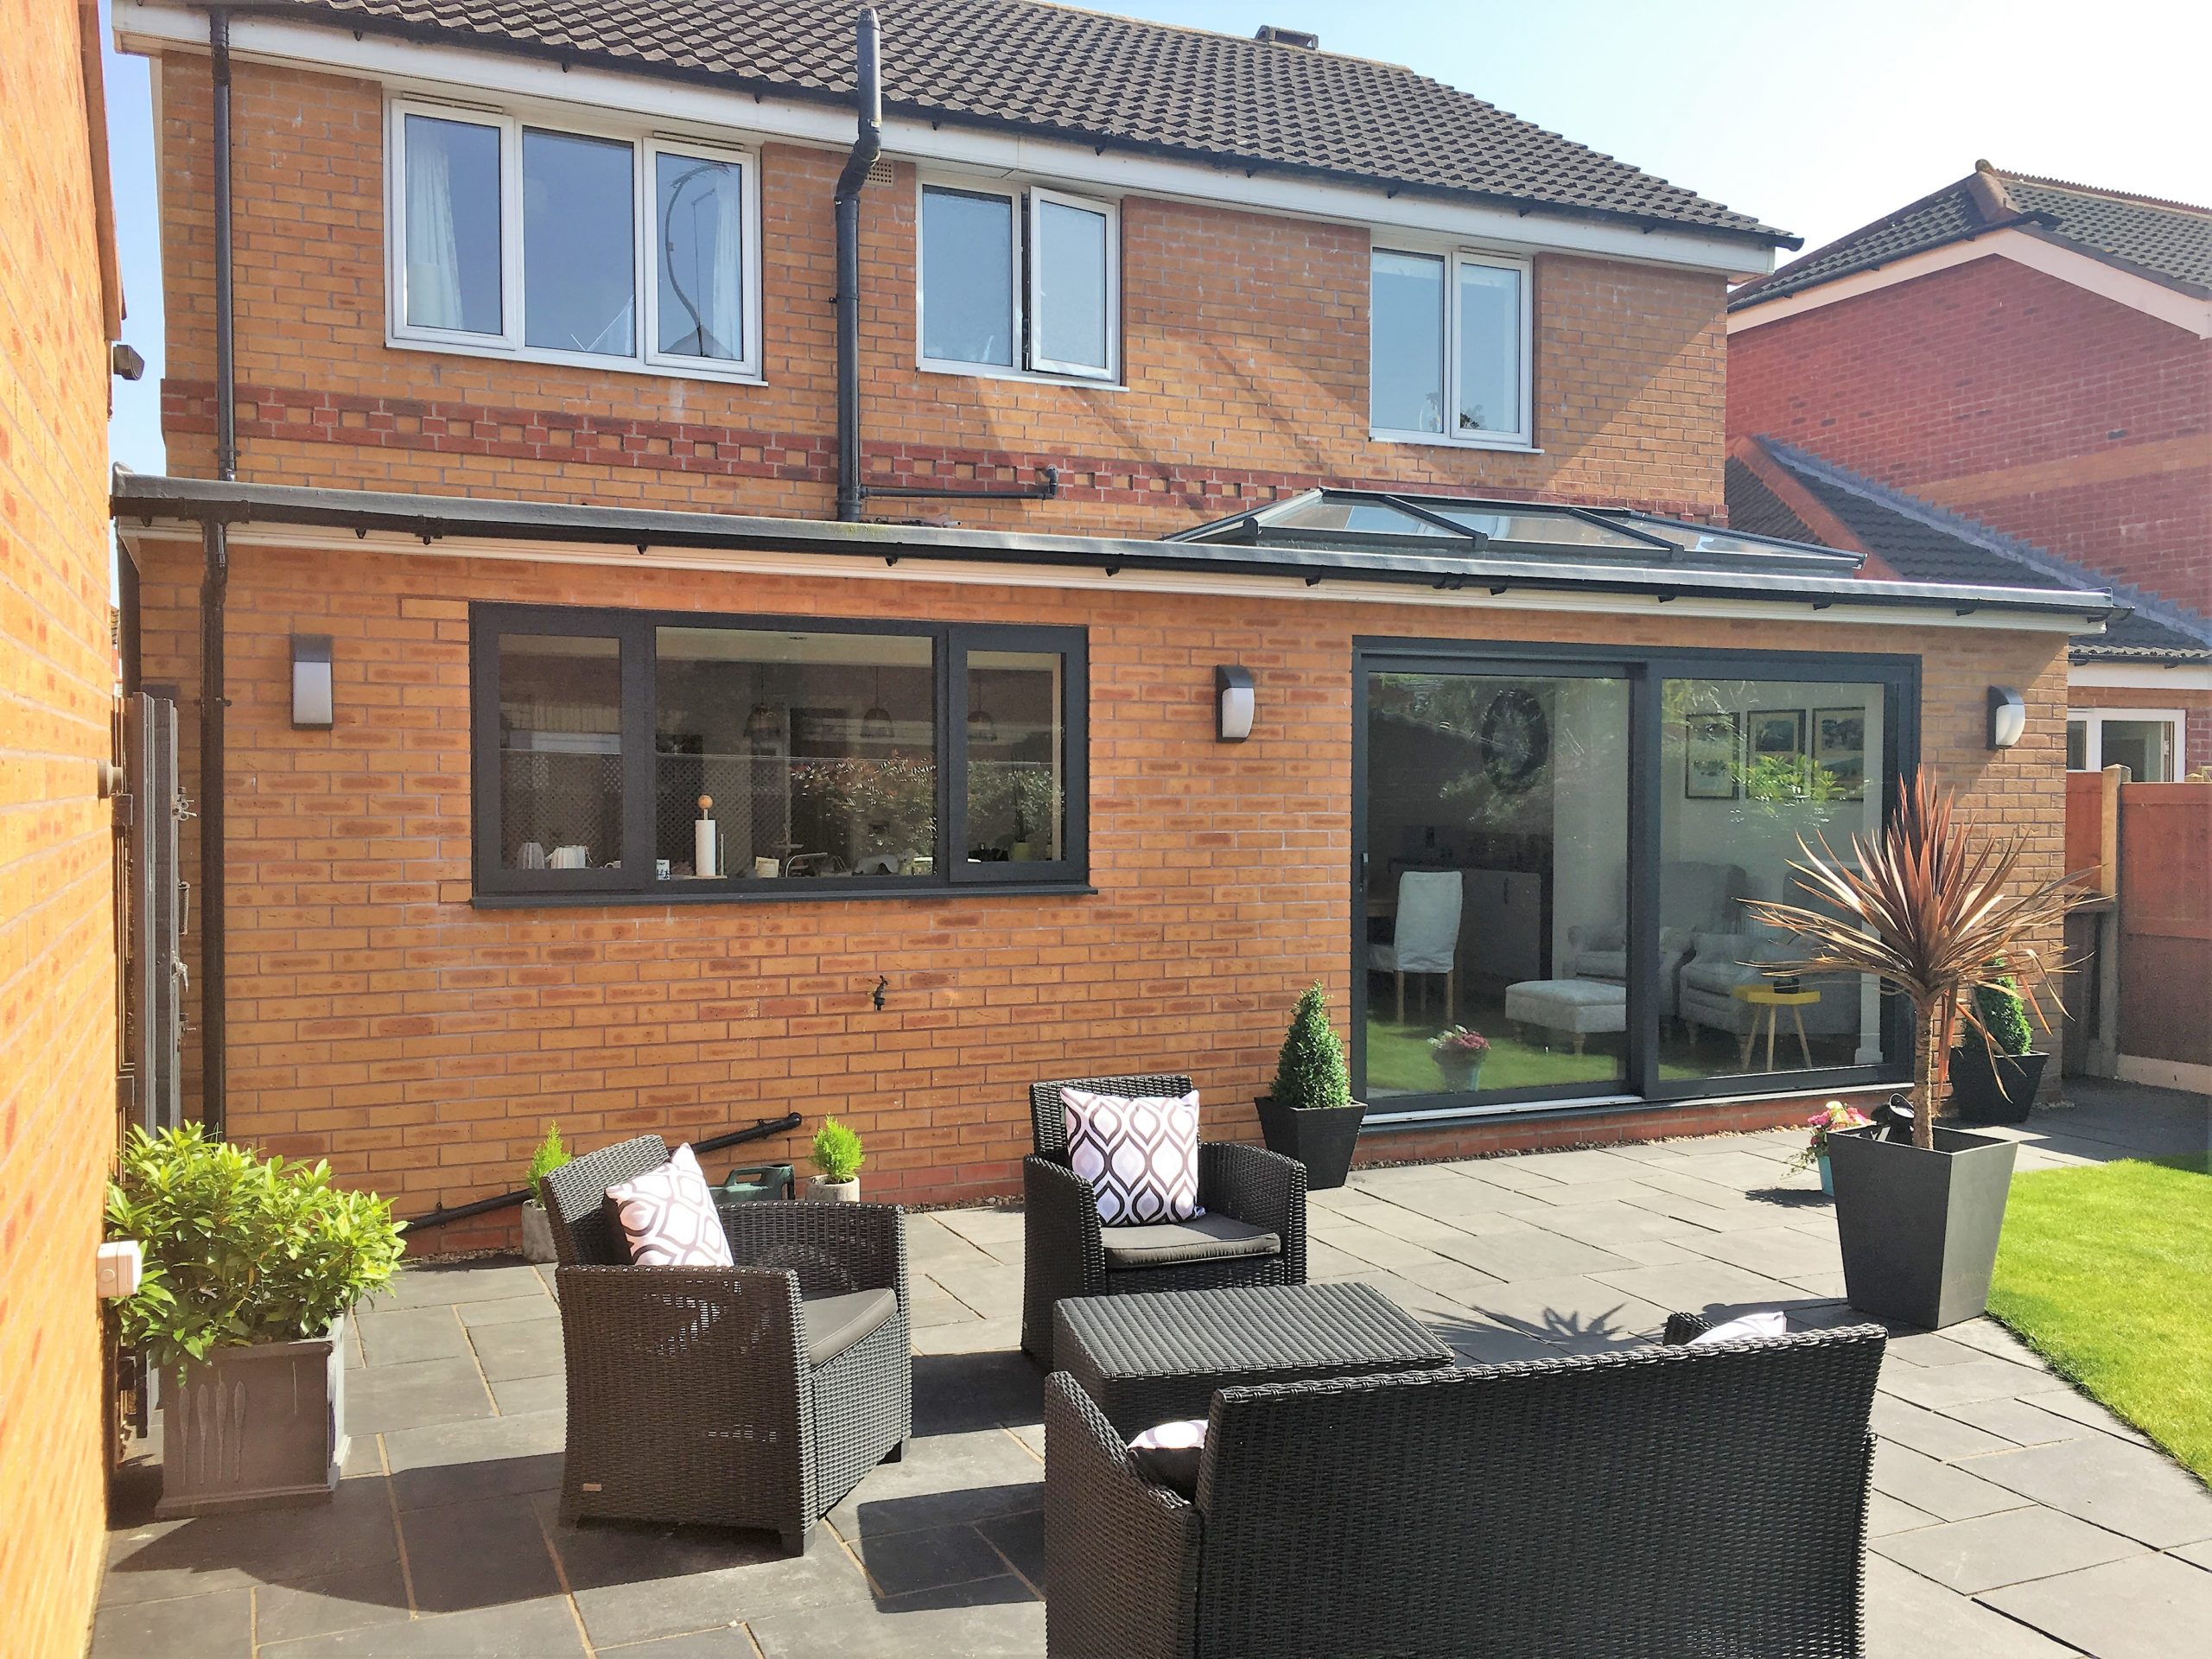 View of single storey extension and lawn furniture